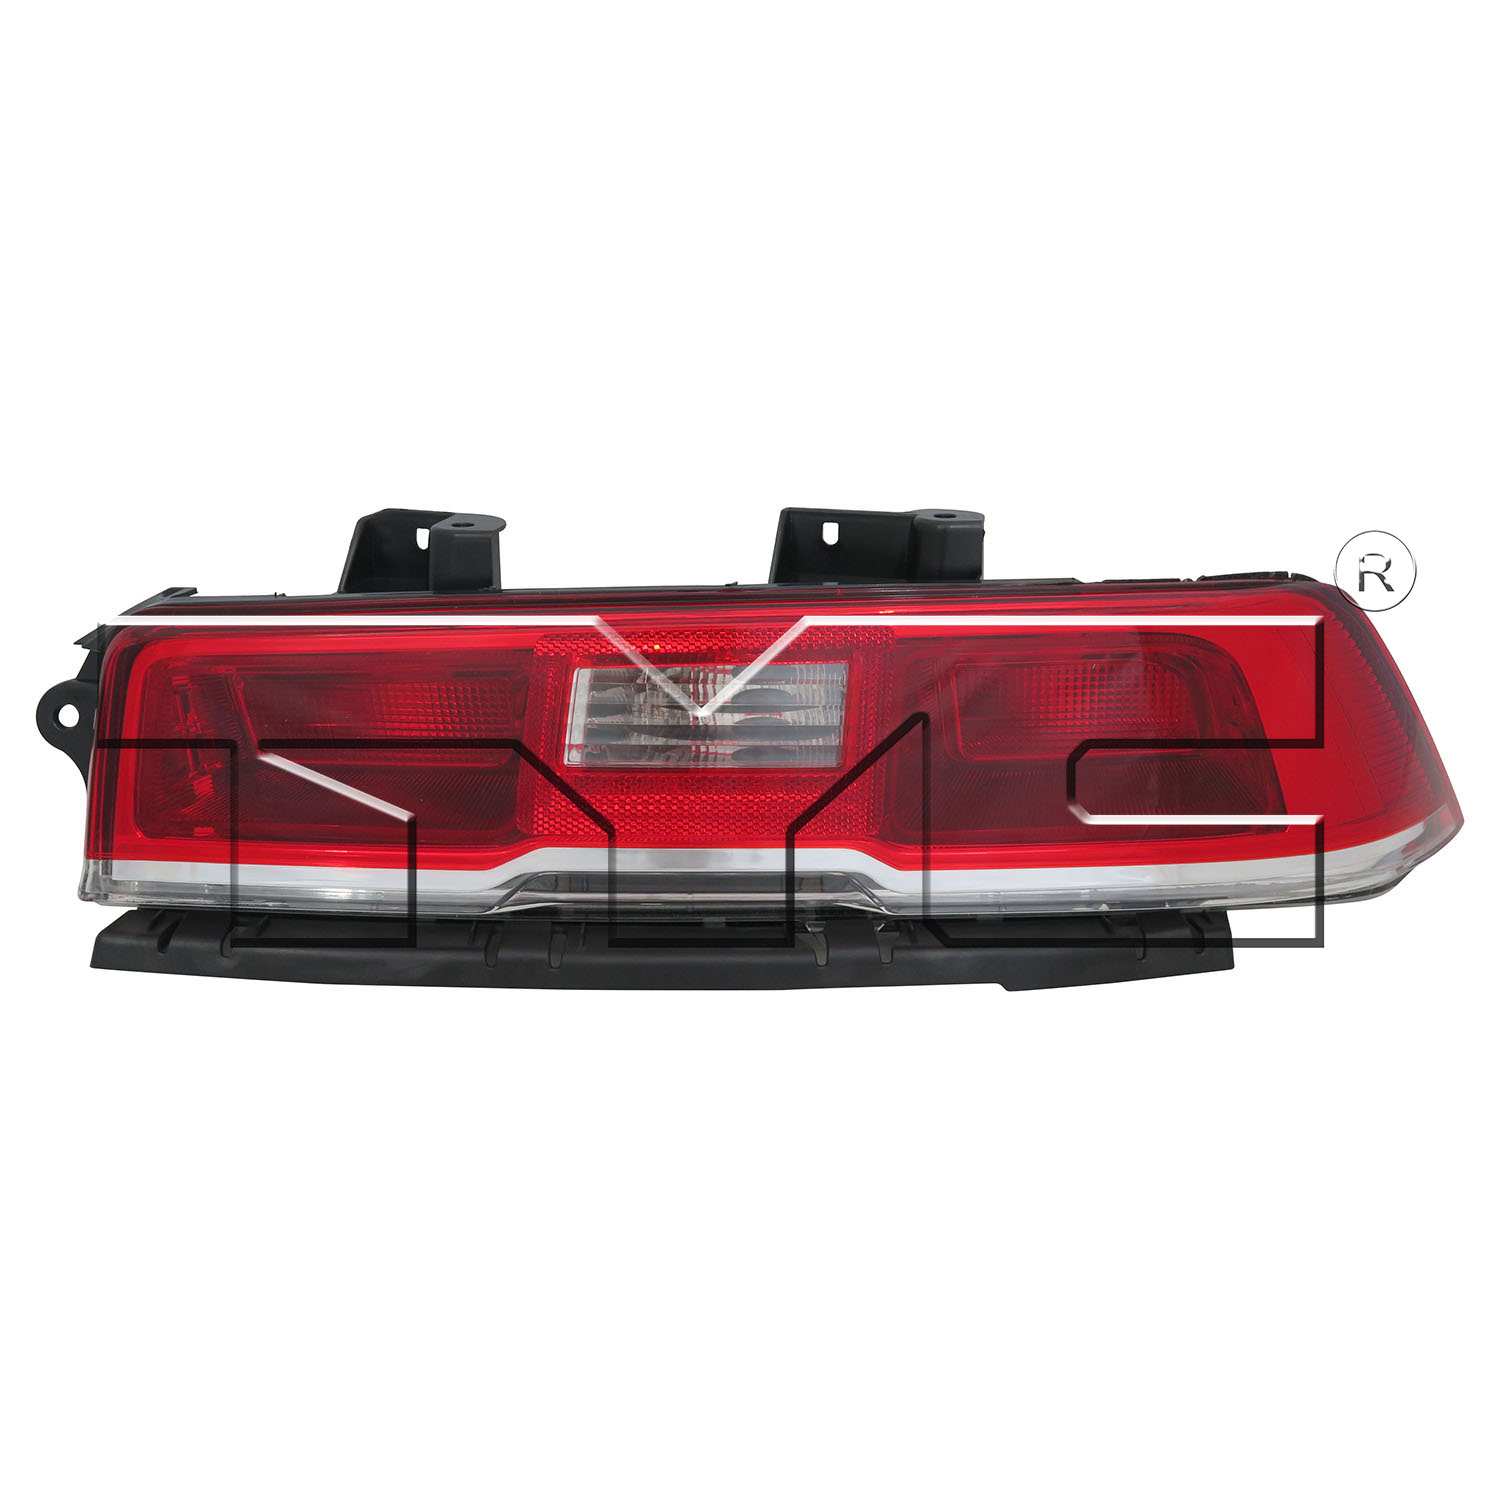 Aftermarket TAILLIGHTS for CHEVROLET - CAMARO, CAMARO,15-15,RT Taillamp assy